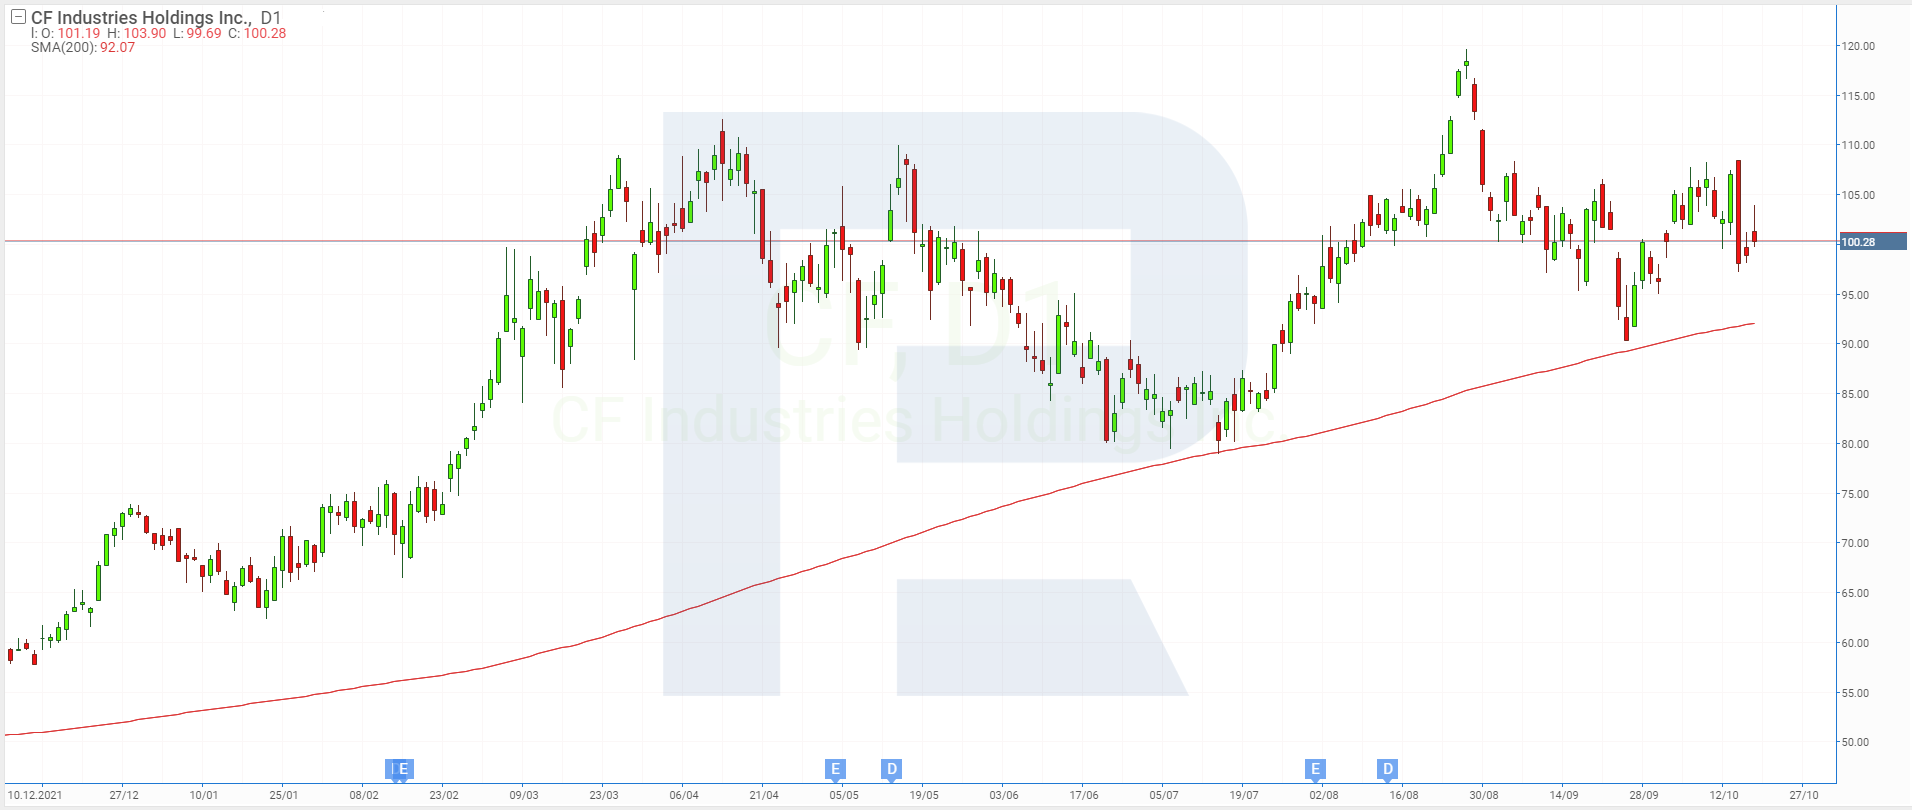 Stock chart of CF Industries Holdings